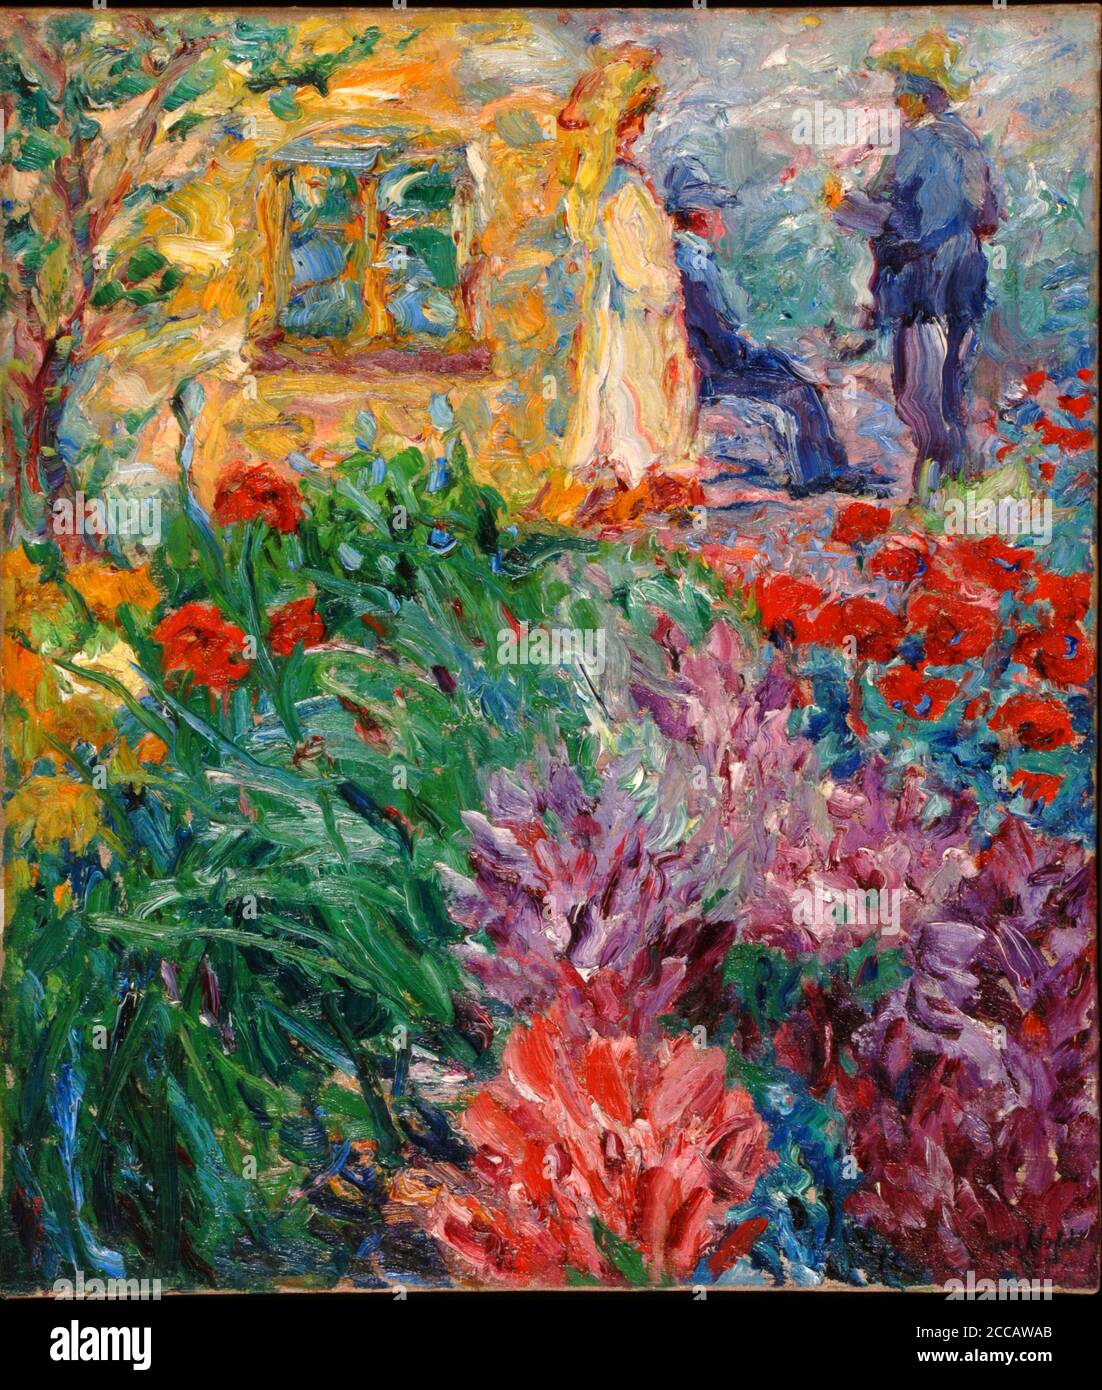 Flower garden with figures. Museum: PRIVATE COLLECTION. Author: EMIL NOLDE. Stock Photo